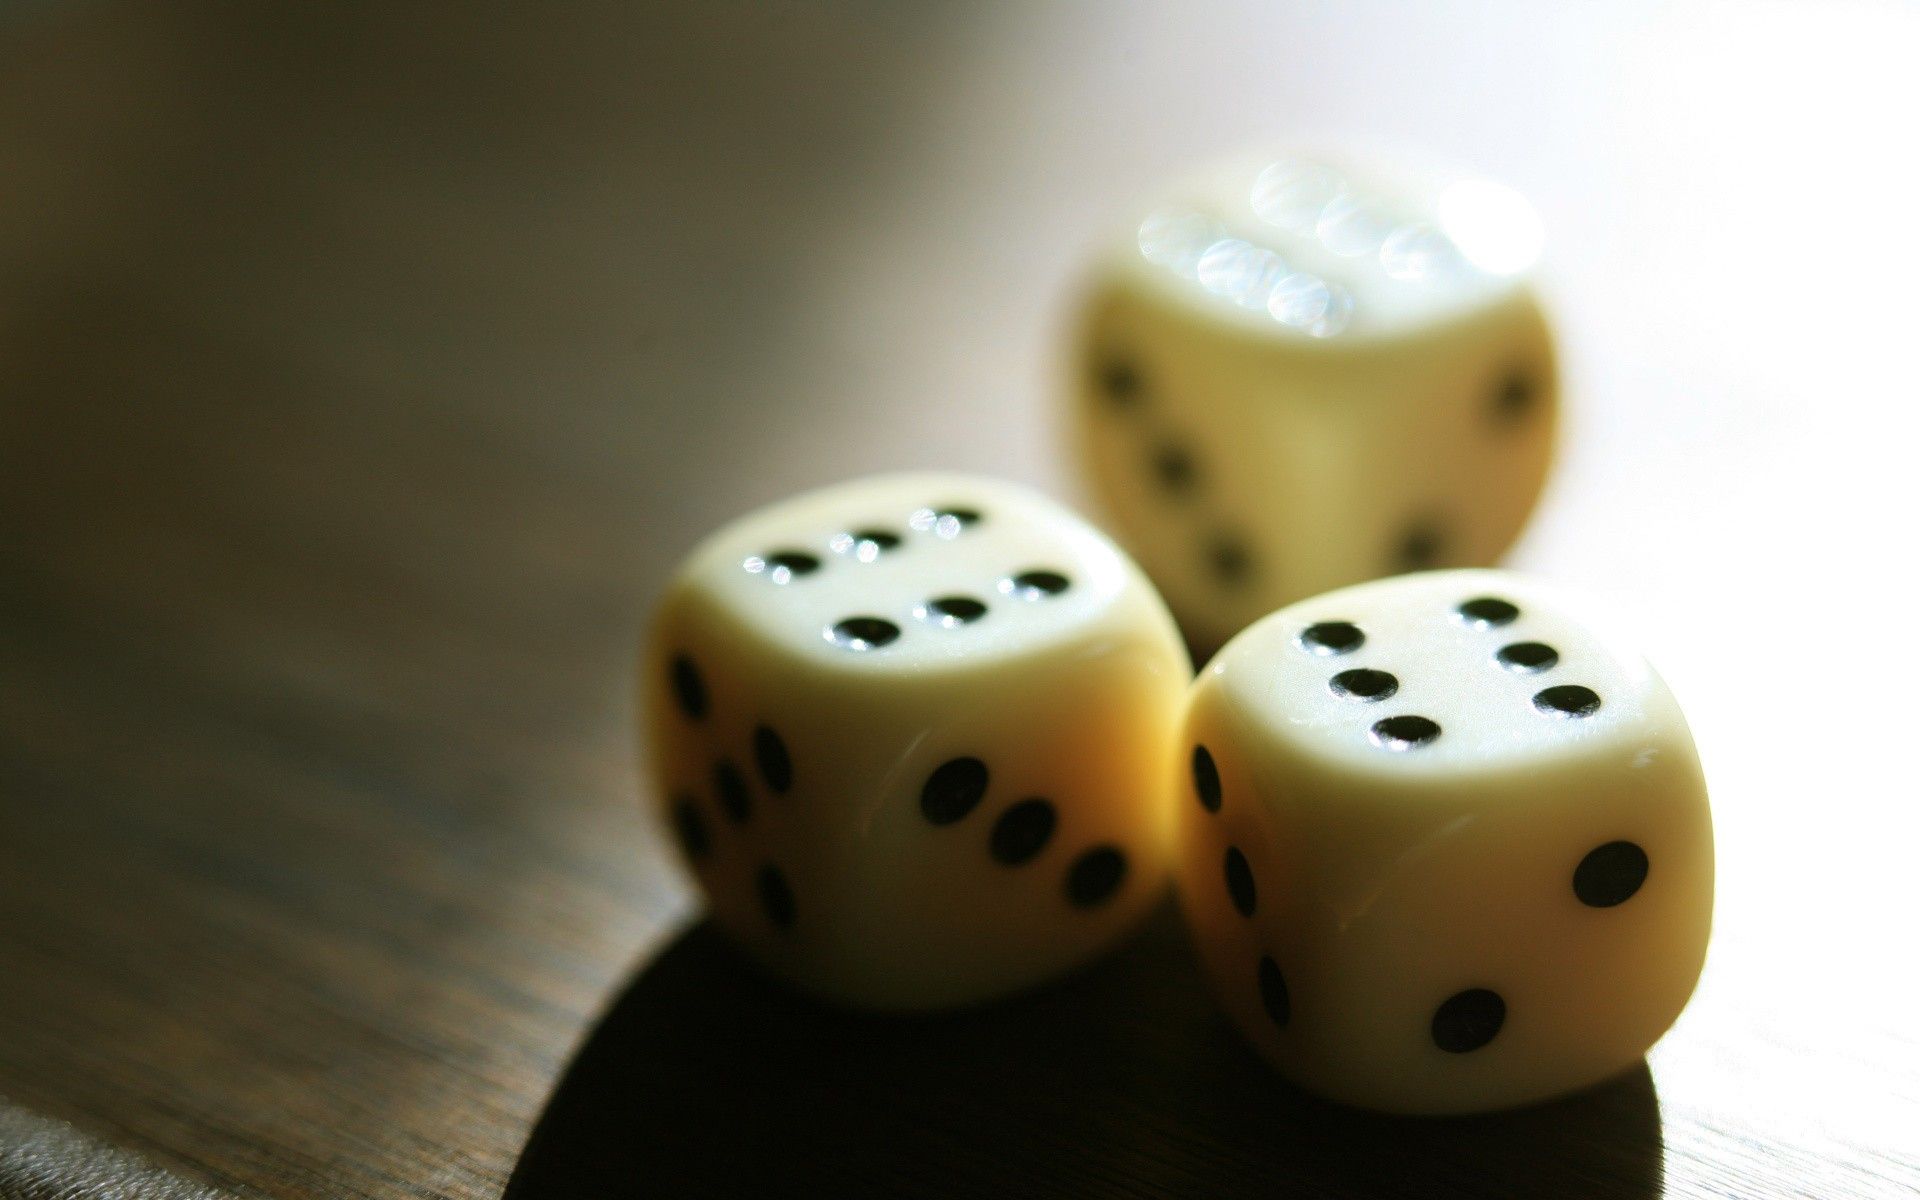 images of dice